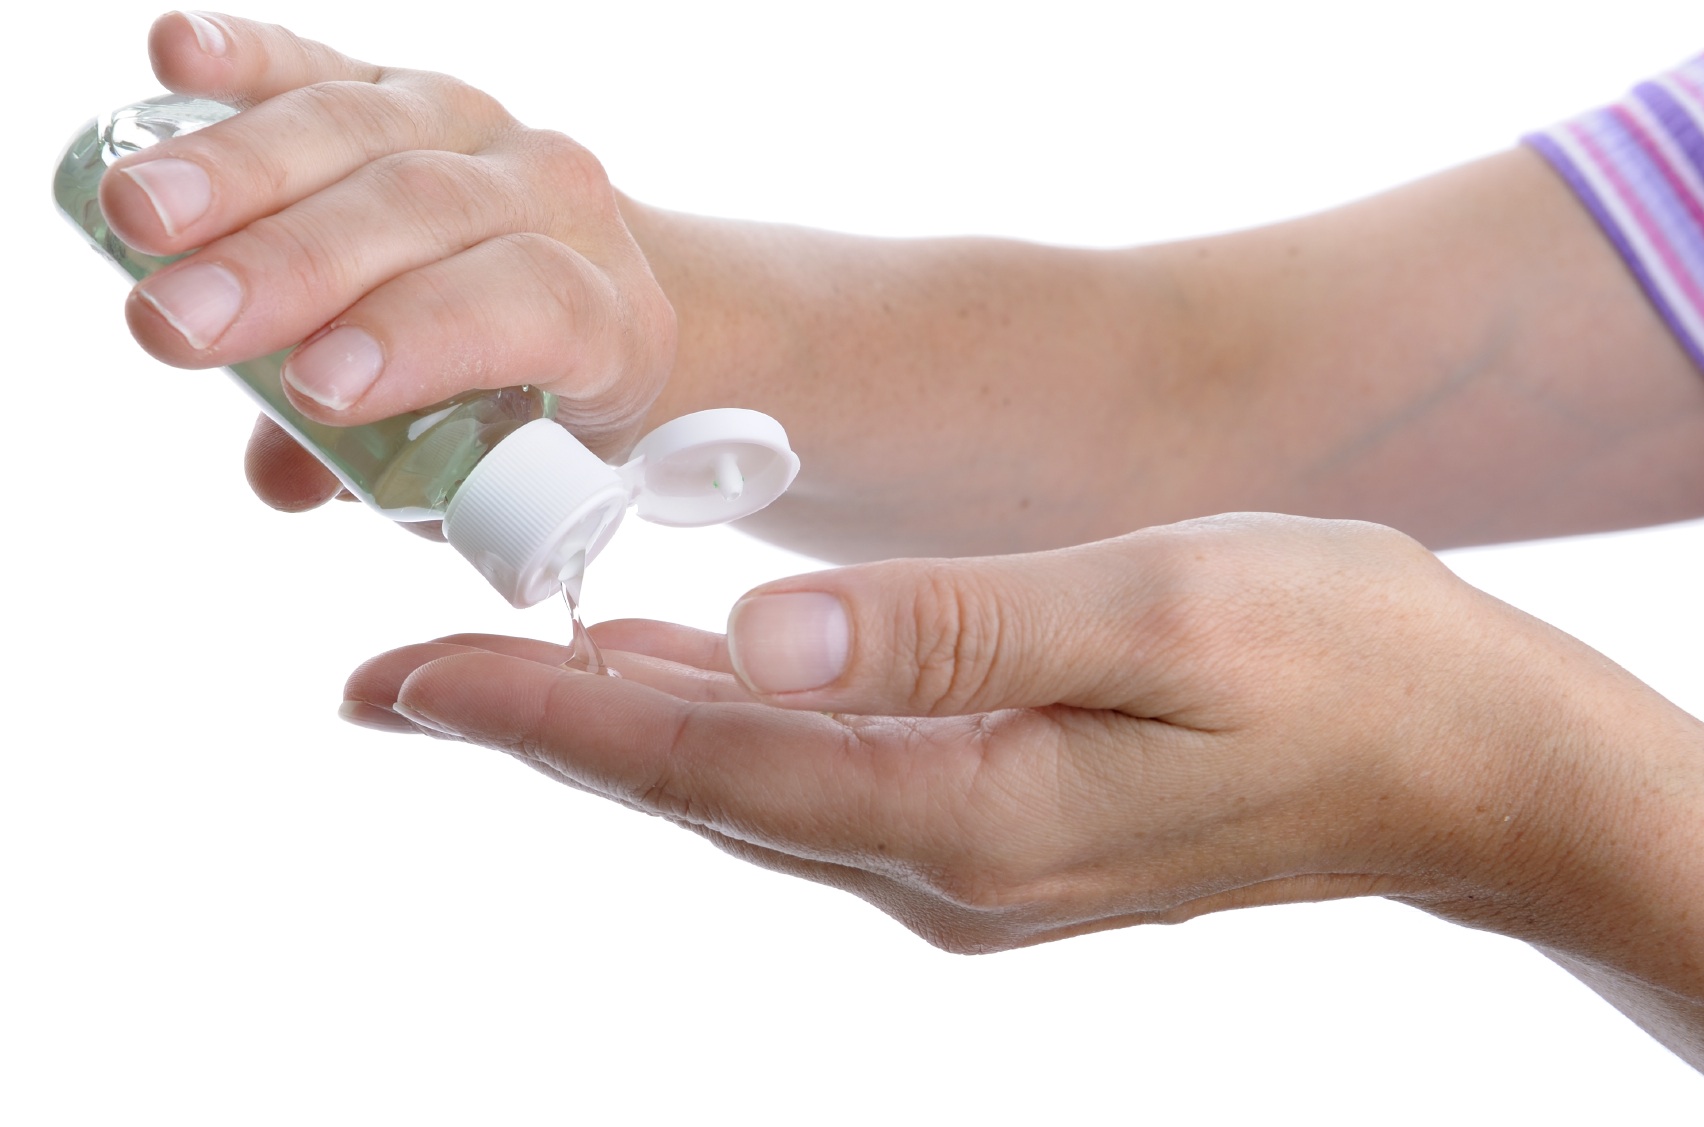 Fretting Hand Sanitizer - How To Use Hands Sanitizers To Counteract Infection 2